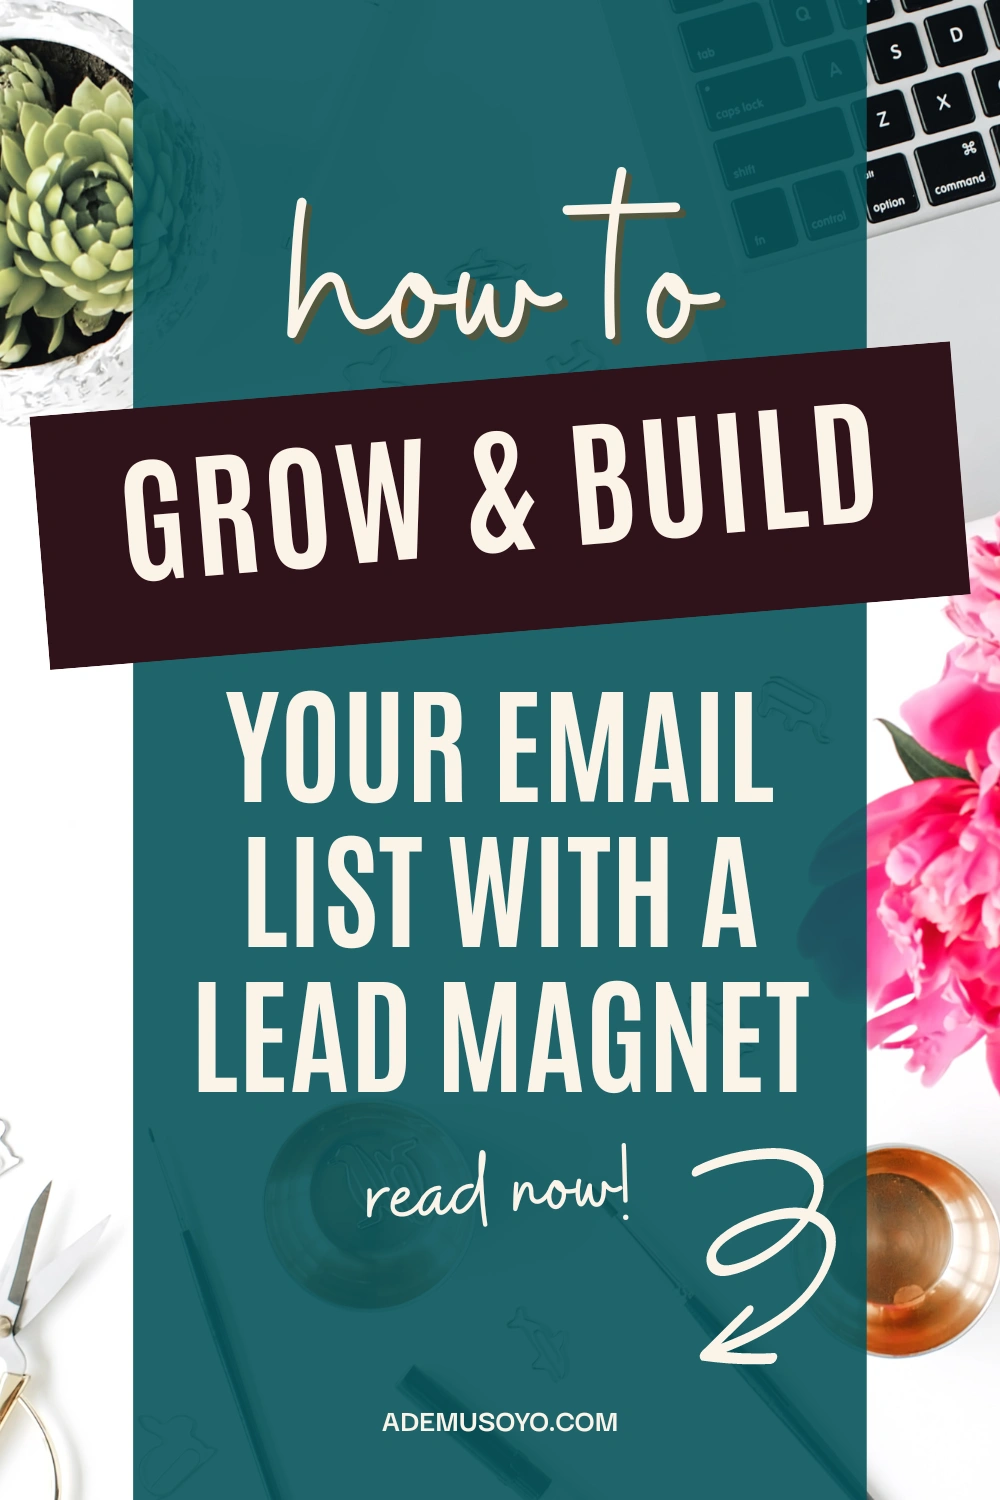 how to create a high-converting lead magnet, lead magnet template, lead magnet design, lead magnet landing page, lead magnet examples, lead magnet email list, lead magnet design ideas